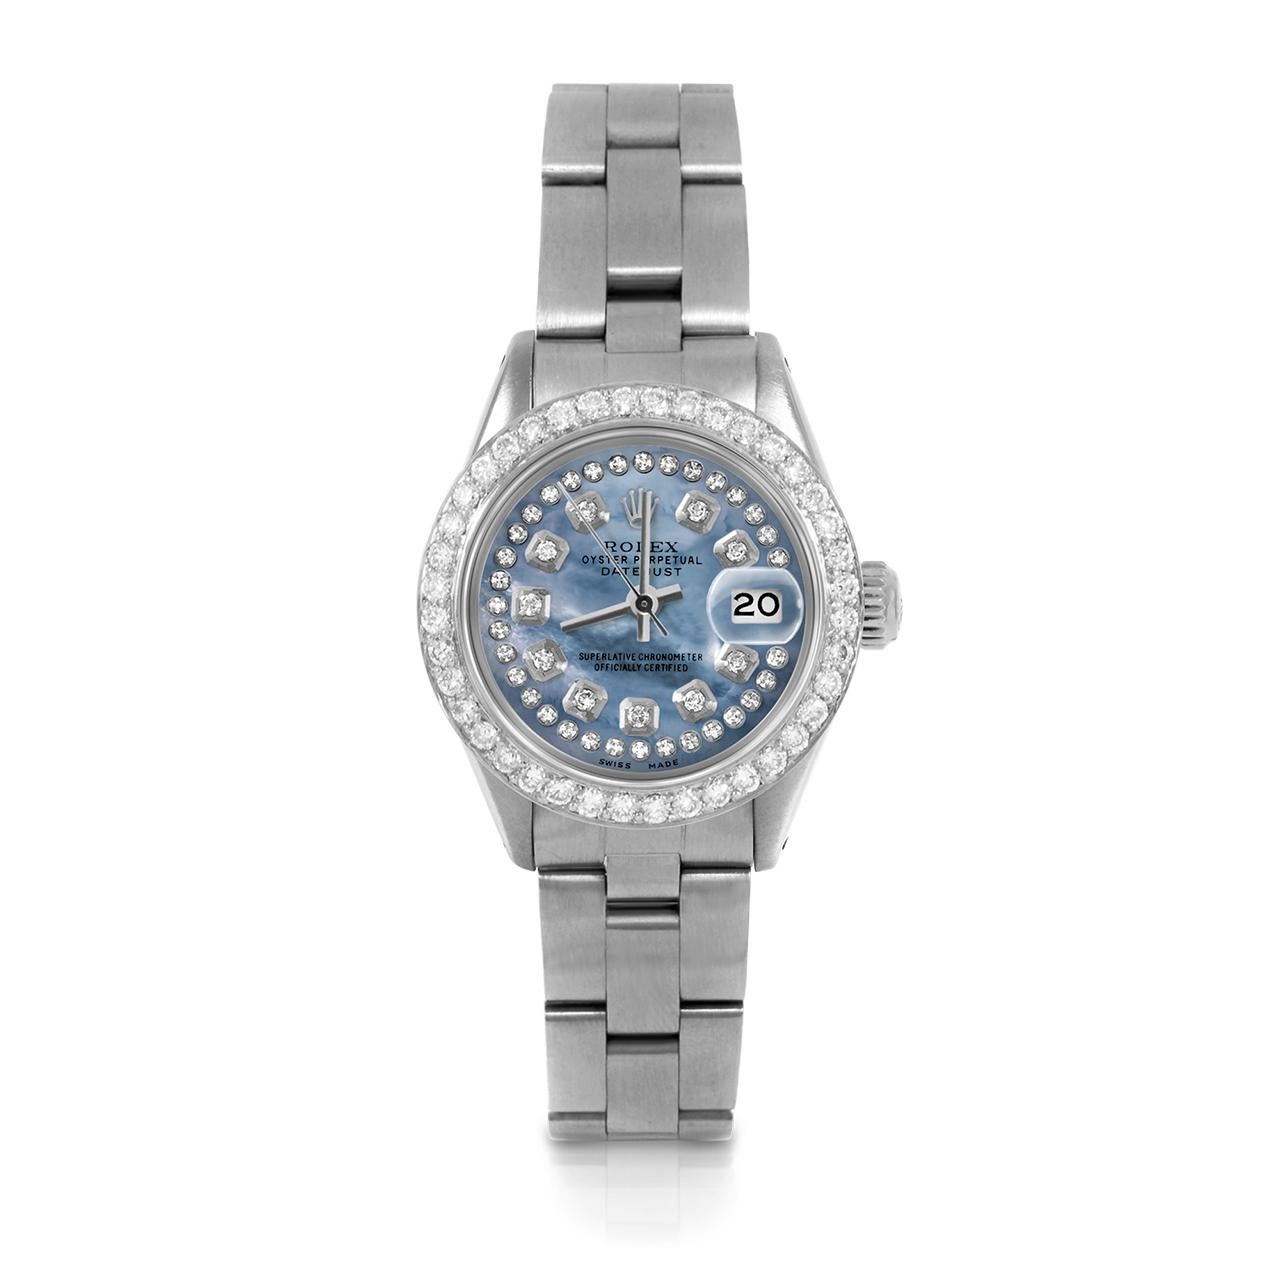 Pre-Owned Rolex 6917 Ladies 26mm Datejust Watch, Custom Blue Mother of Pearl String Diamond Dial & Custom 1ct Diamond Bezel on Rolex Stainless Steel Oyster Band.   

SKU 6917-SS-BLMOP-STRD-BDS-OYS


Brand/Model:        Rolex Datejust
Model Number:  